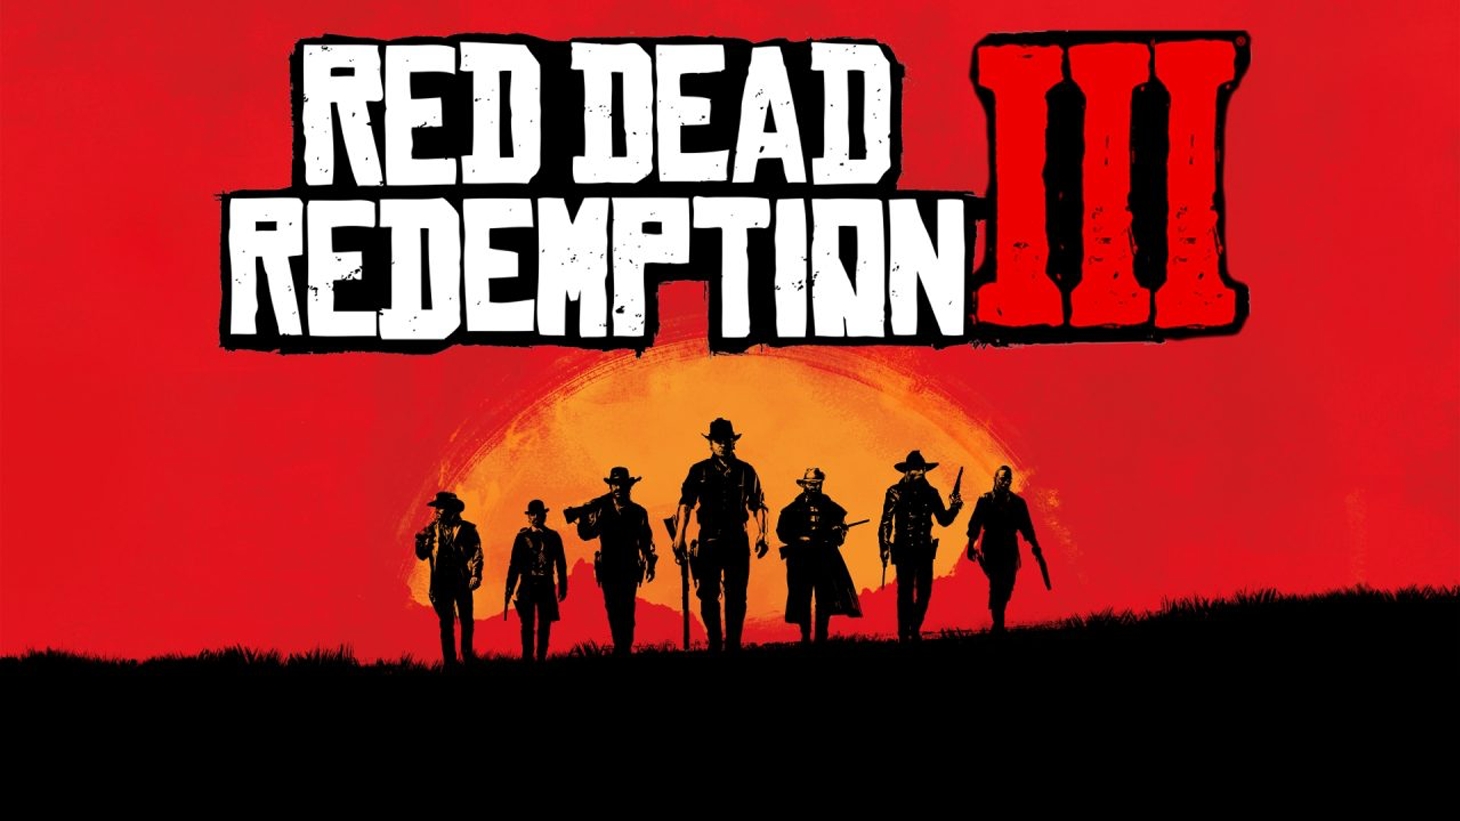 Red Dead Redemption 2 Available for Pre-order Today on Xbox One